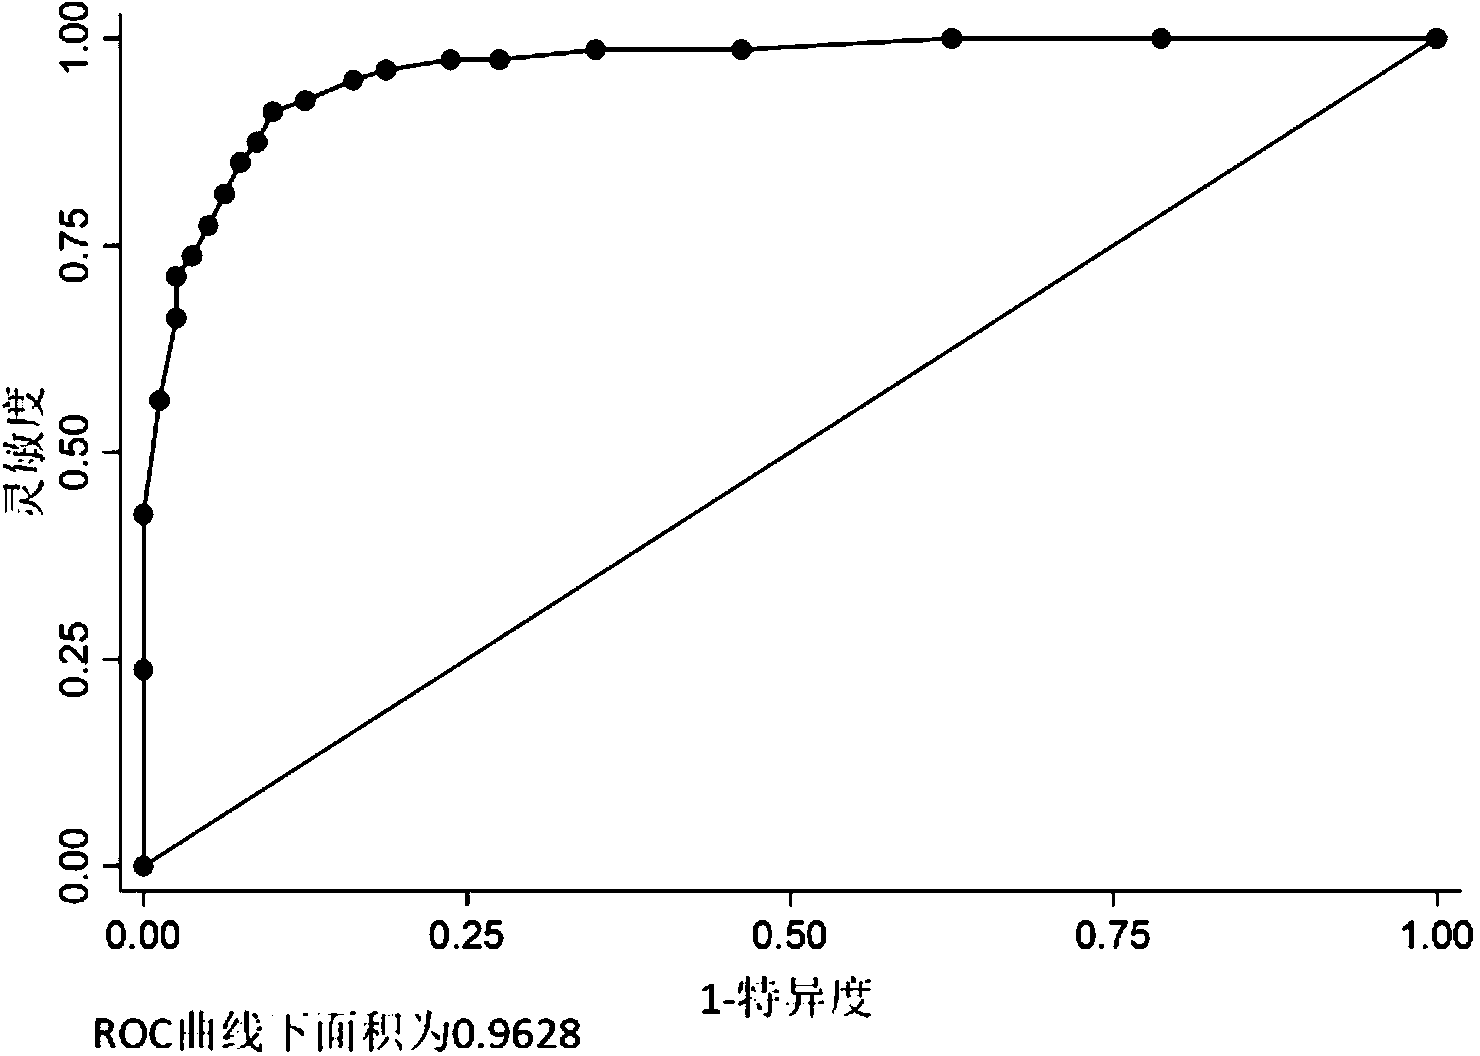 Tiny serum ribonucleic acid marker related to human fetal growth restriction and application thereof